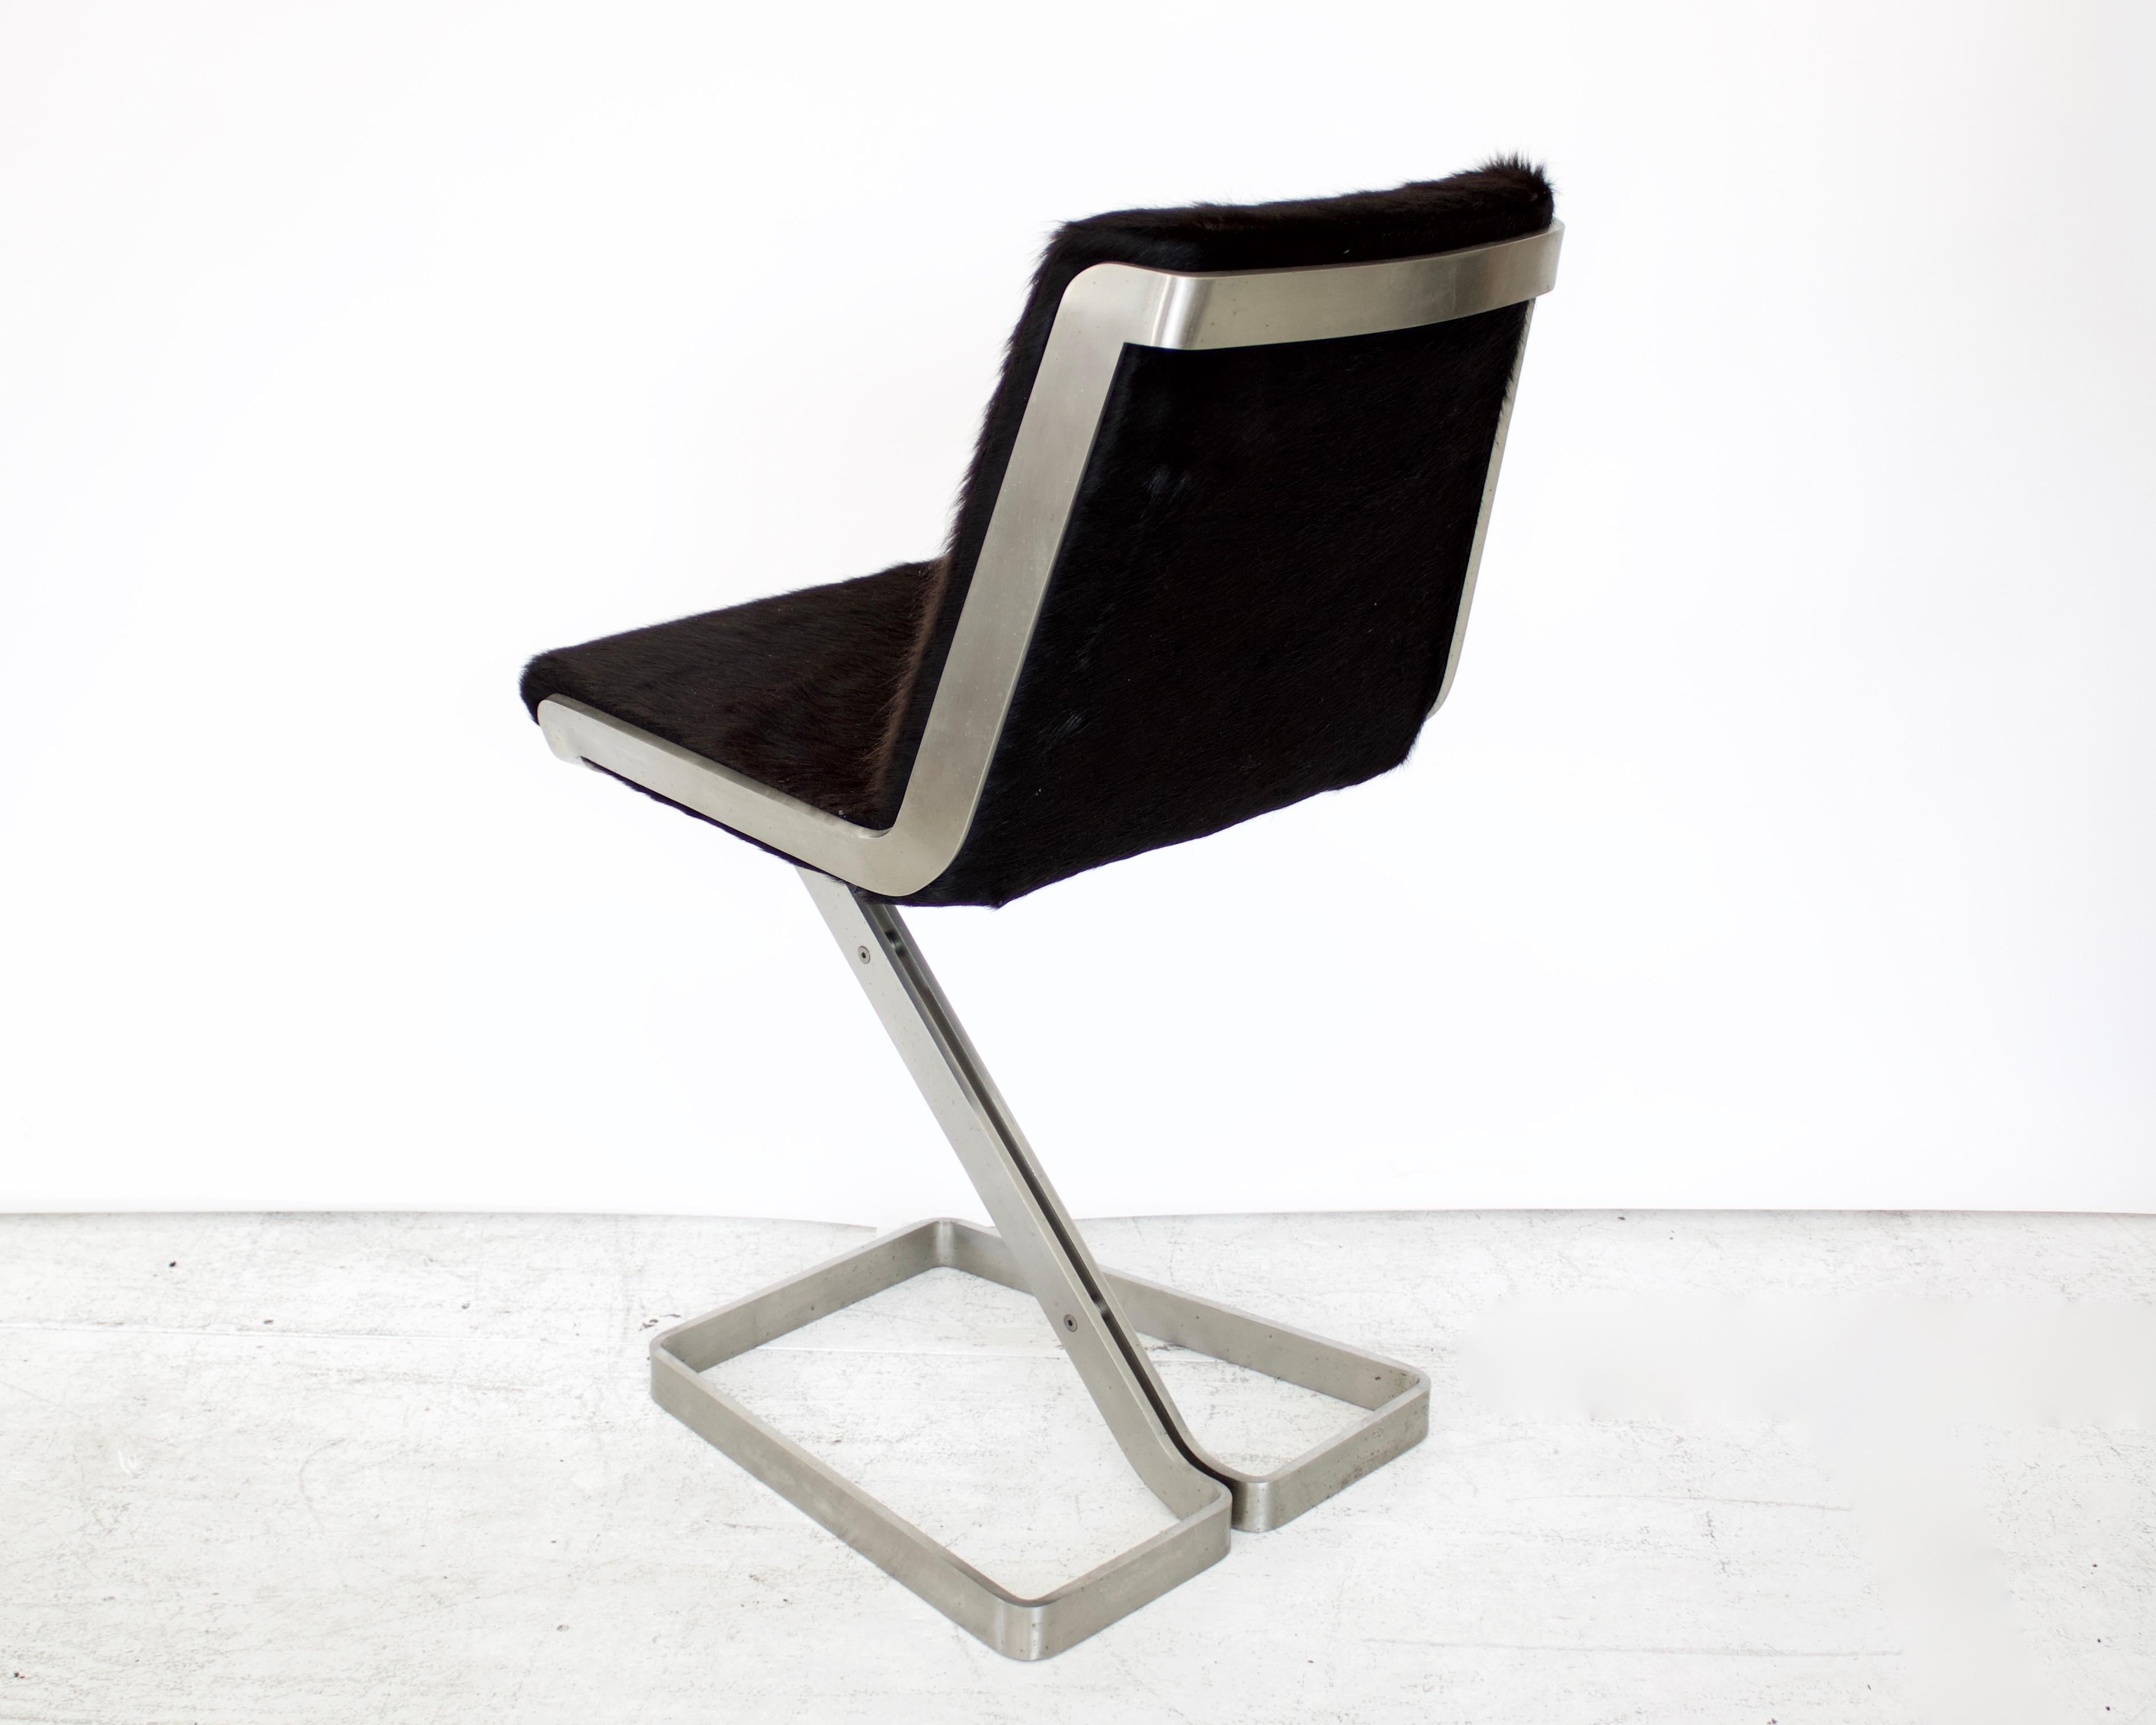 Italian Stainless Steel Desk Chair by Forma Nova In Good Condition For Sale In Chicago, IL